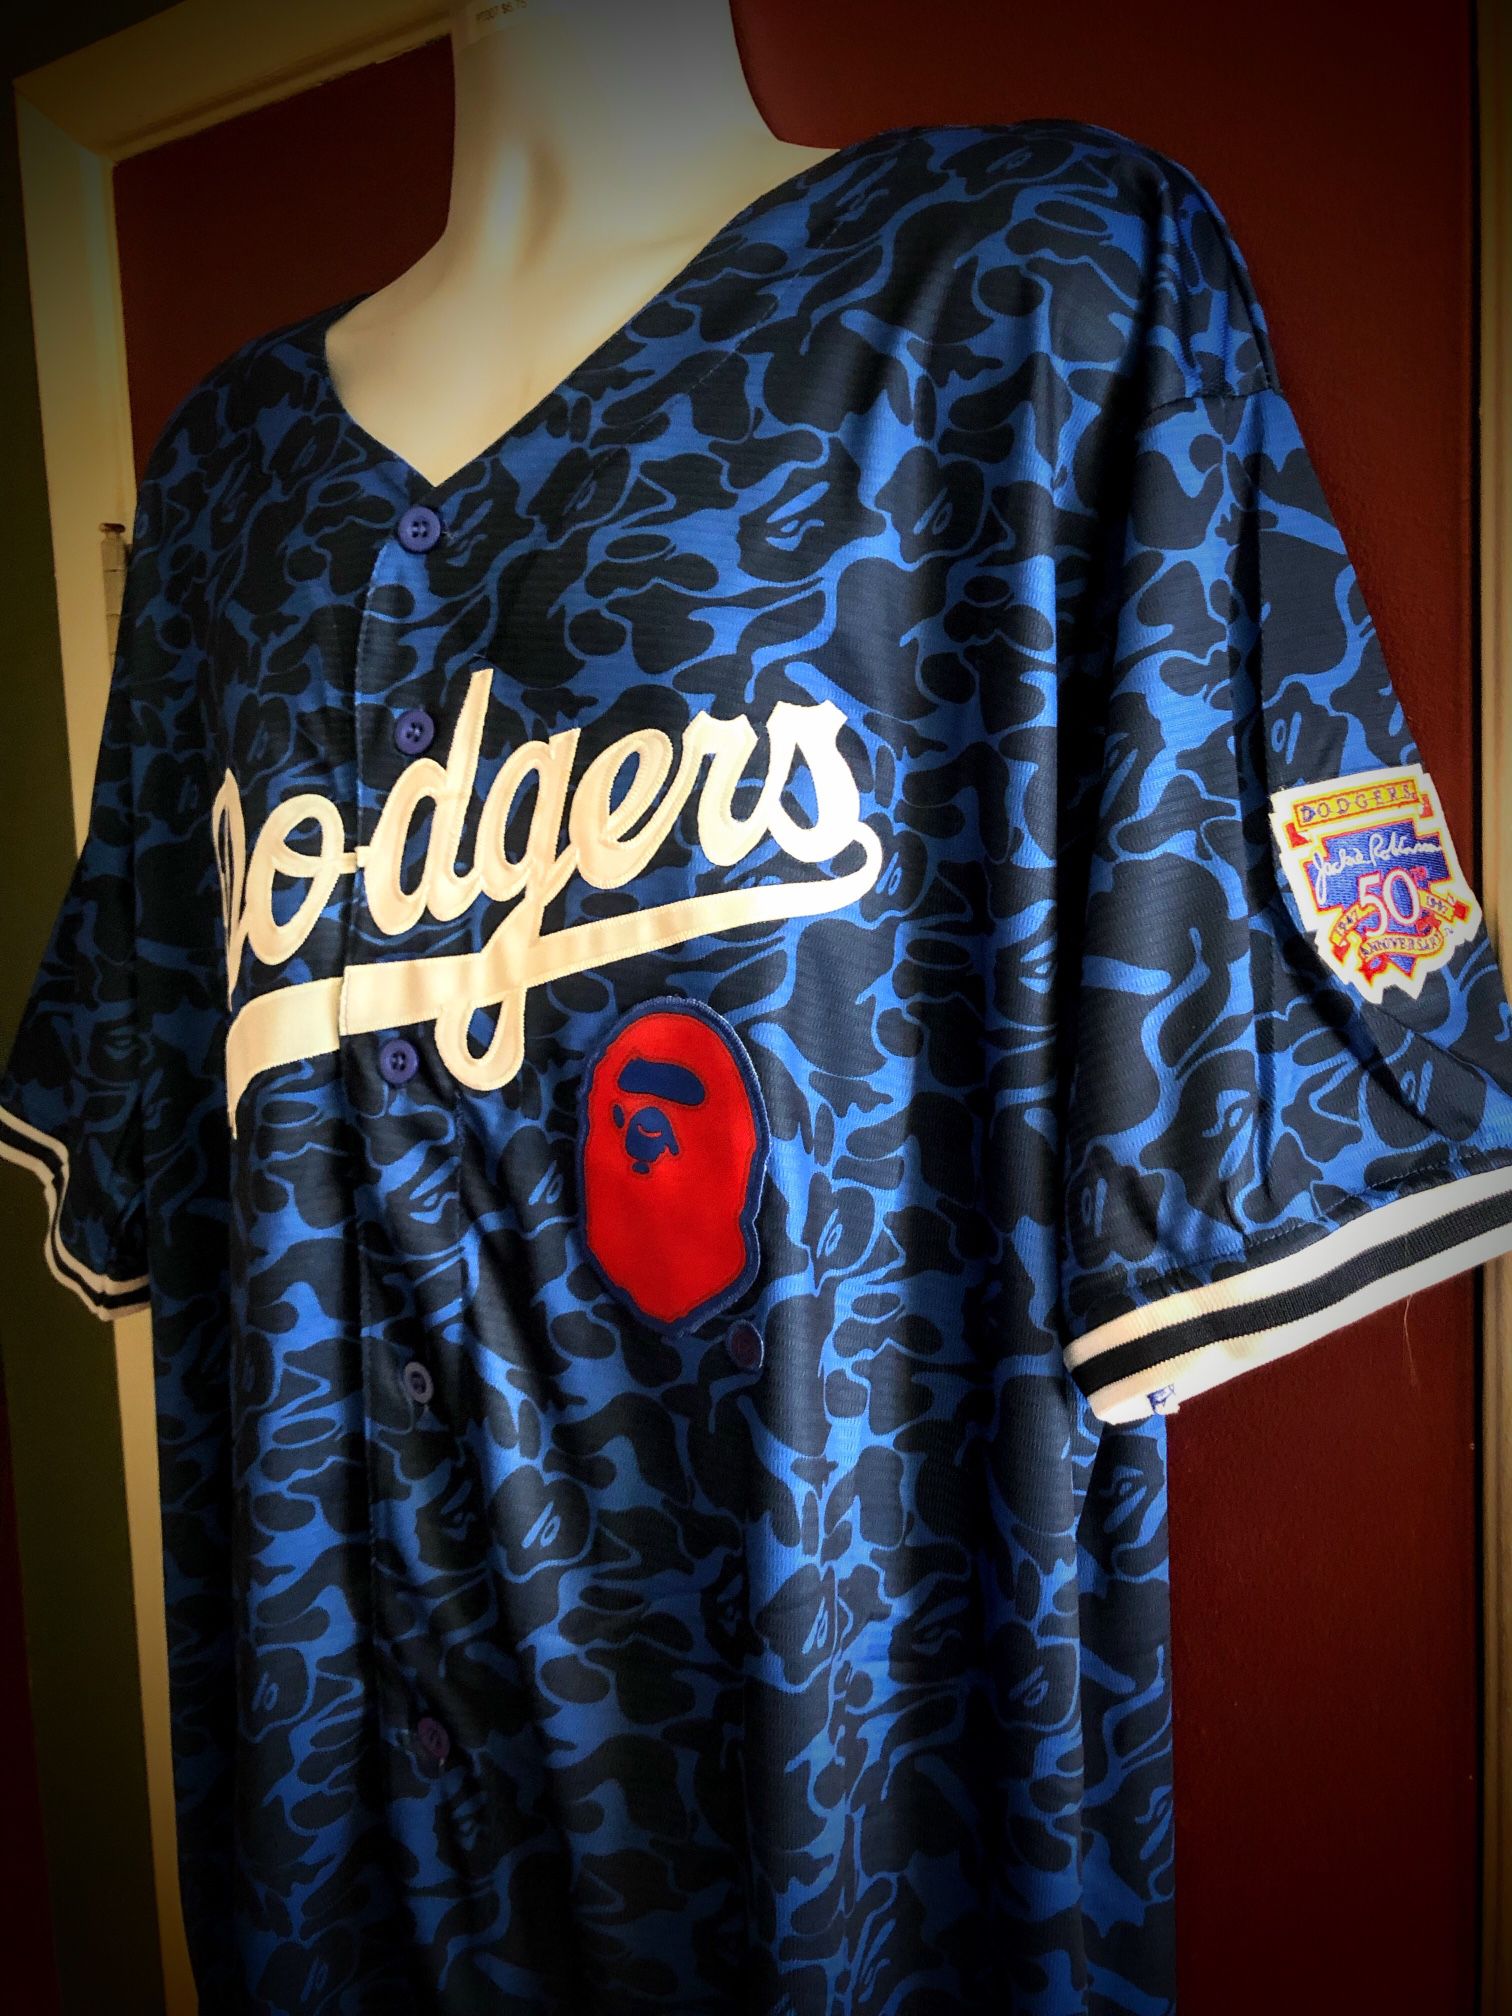 Los Angeles Dodgers #93 A Bathing Ape MLB Baseball Jersey -S.M.L.XL.2X.3X  for Sale in Crystal City, CA - OfferUp